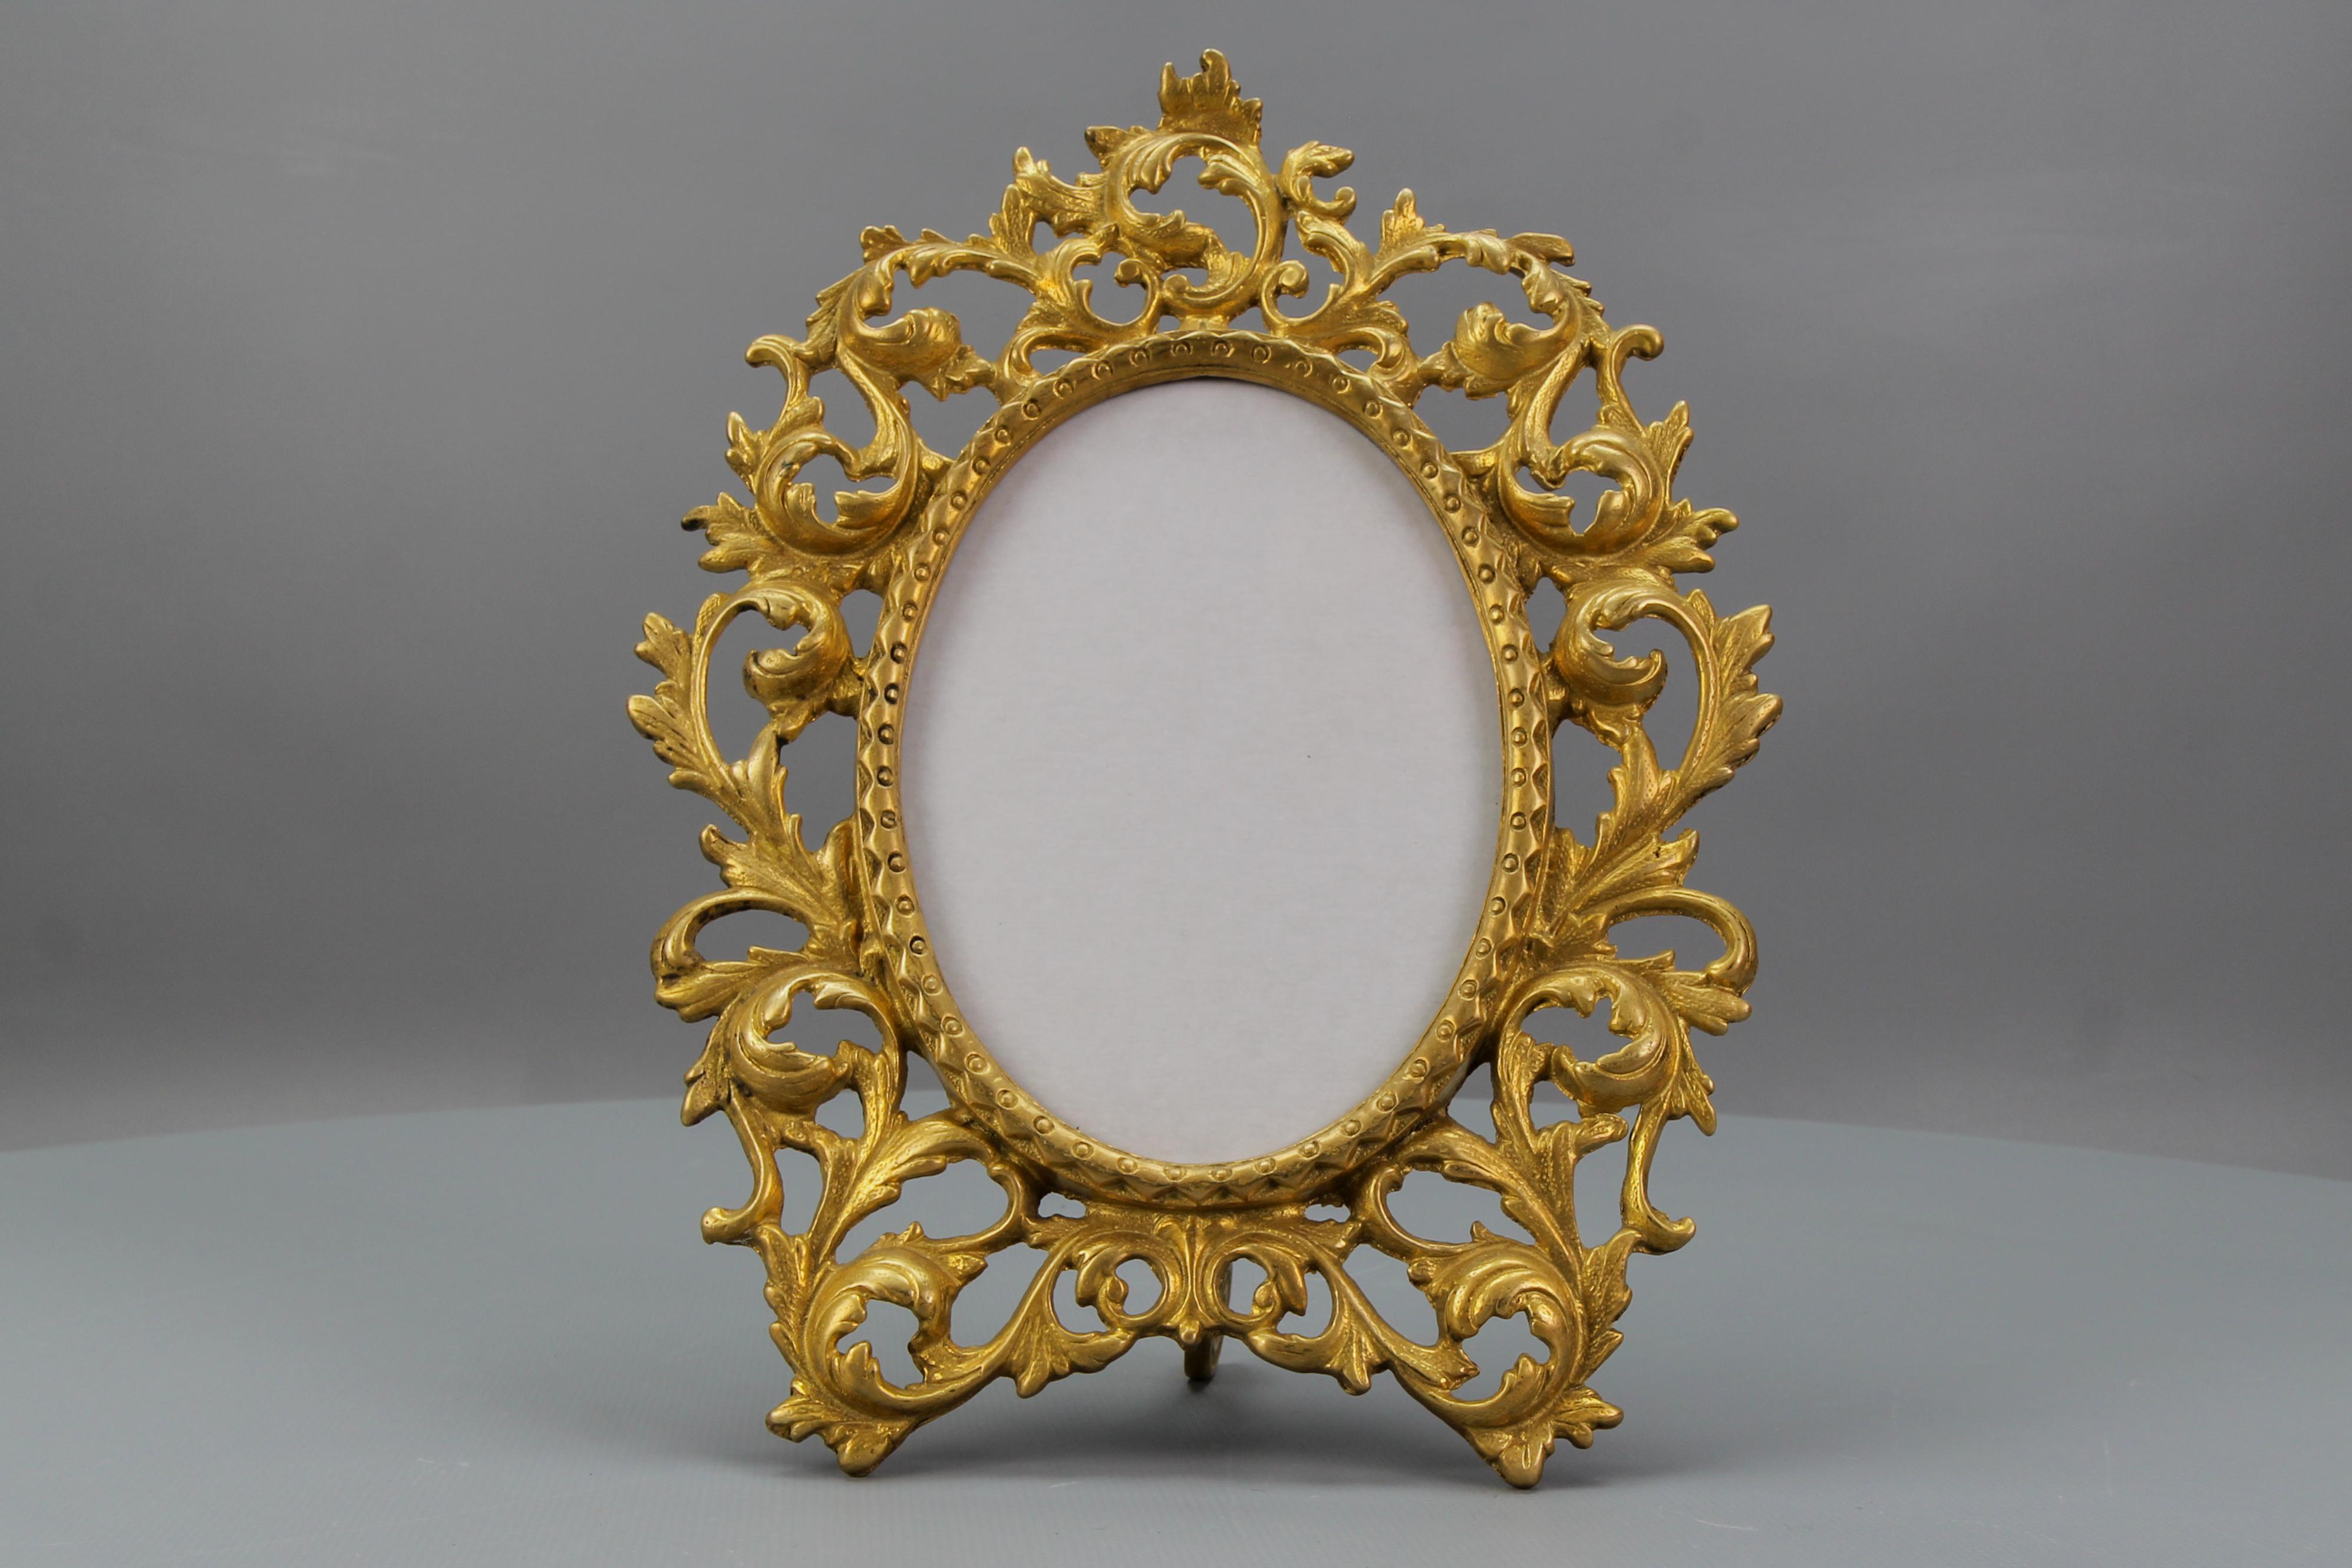 French Bronze Neoclassical Style Oval Desktop Picture Frame from circa the end of the 1930s.
This beautiful ornate oval frame is made of bronze and has a supporting leg on the back. Decorated with typical Neoclassical or Louis XVI-style foliate